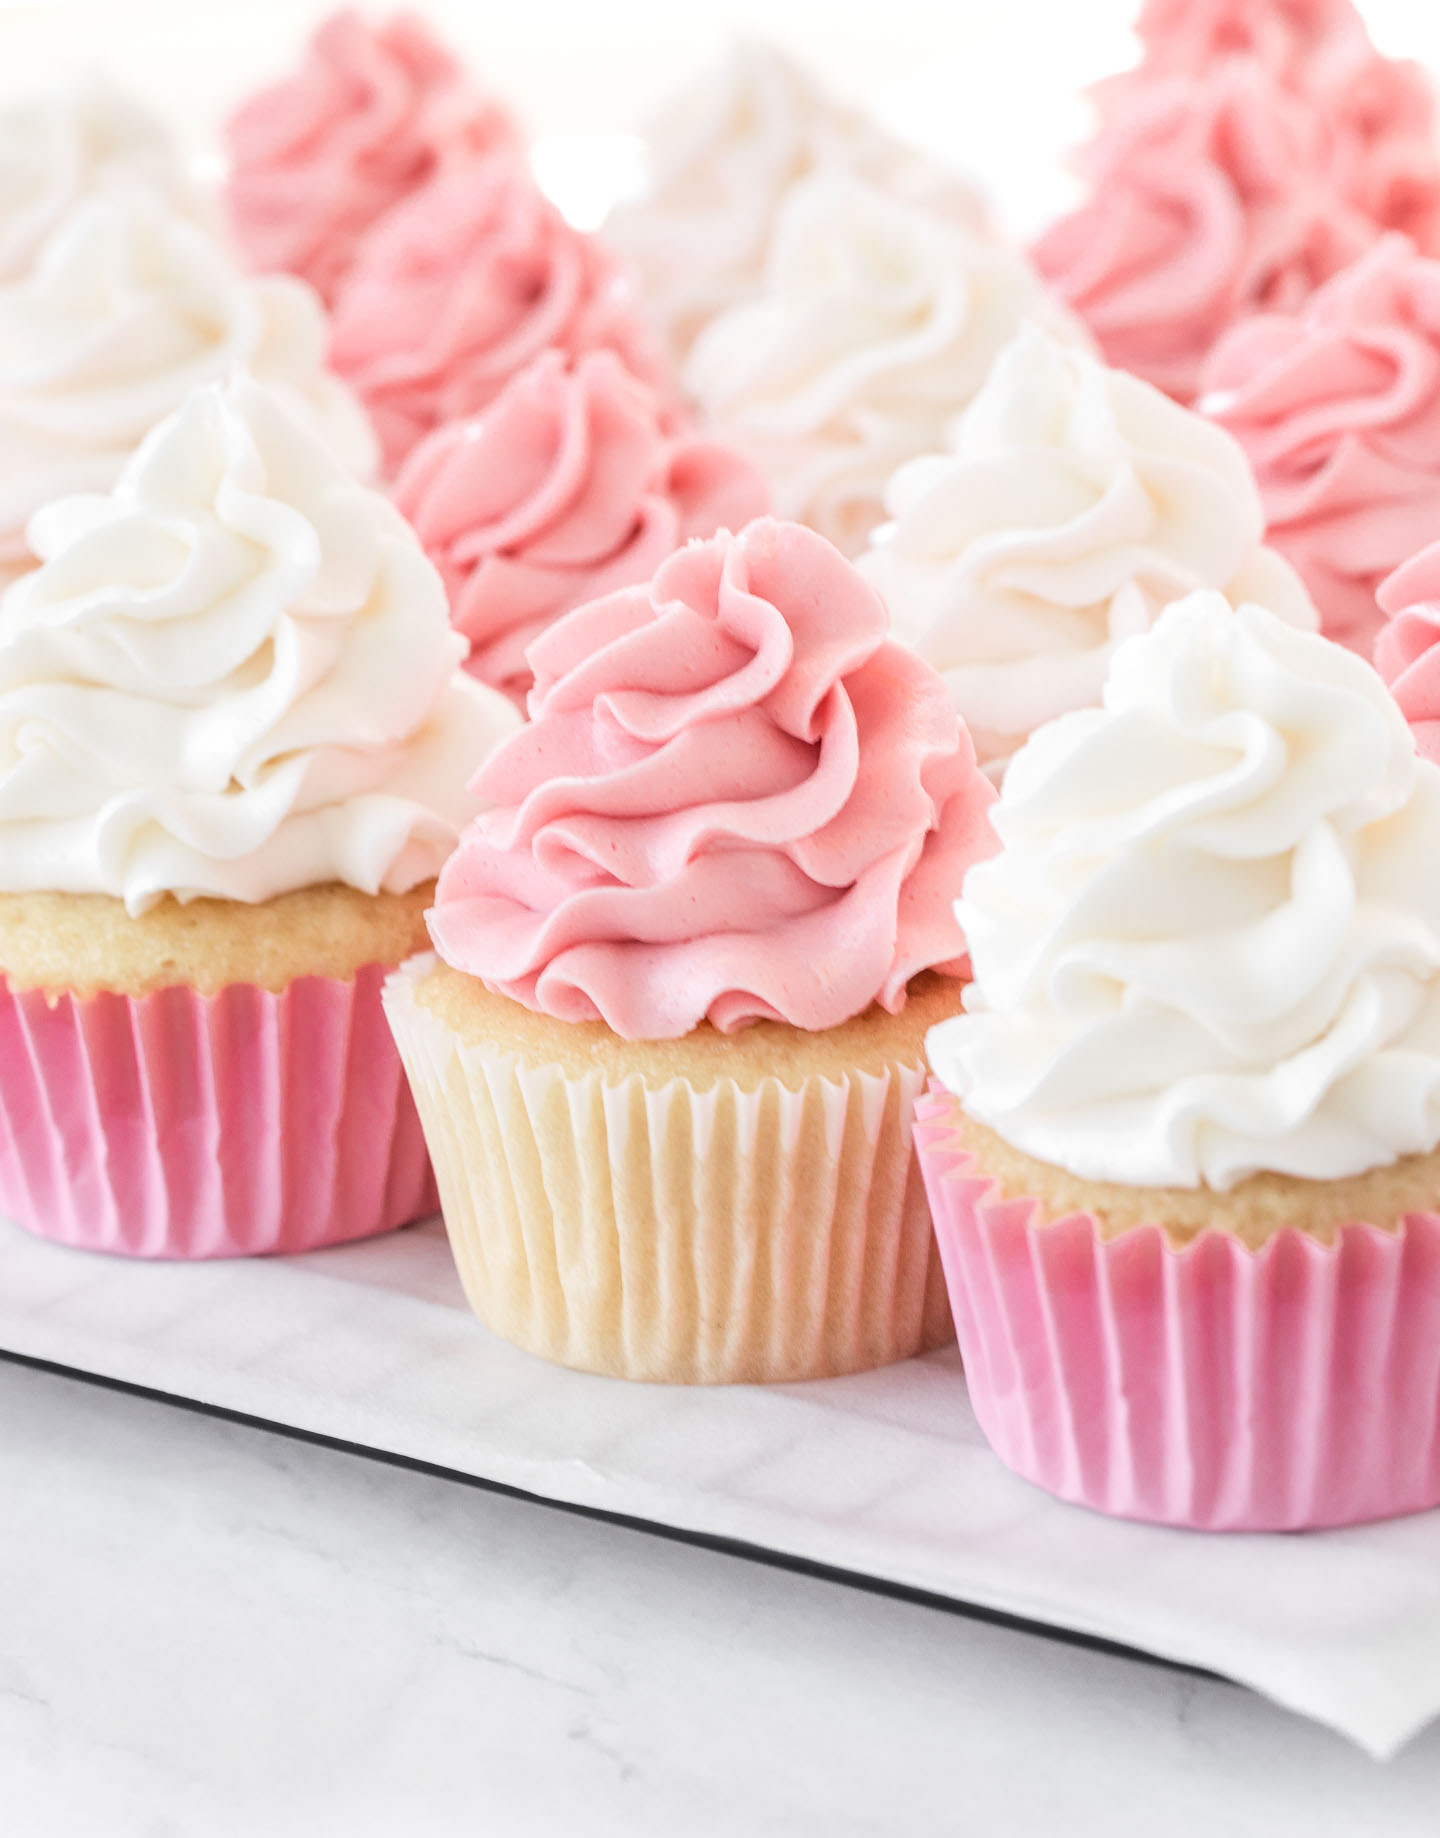 Don't Have a Special Cupcake Pan? Here's How to Bake Cupcakes and